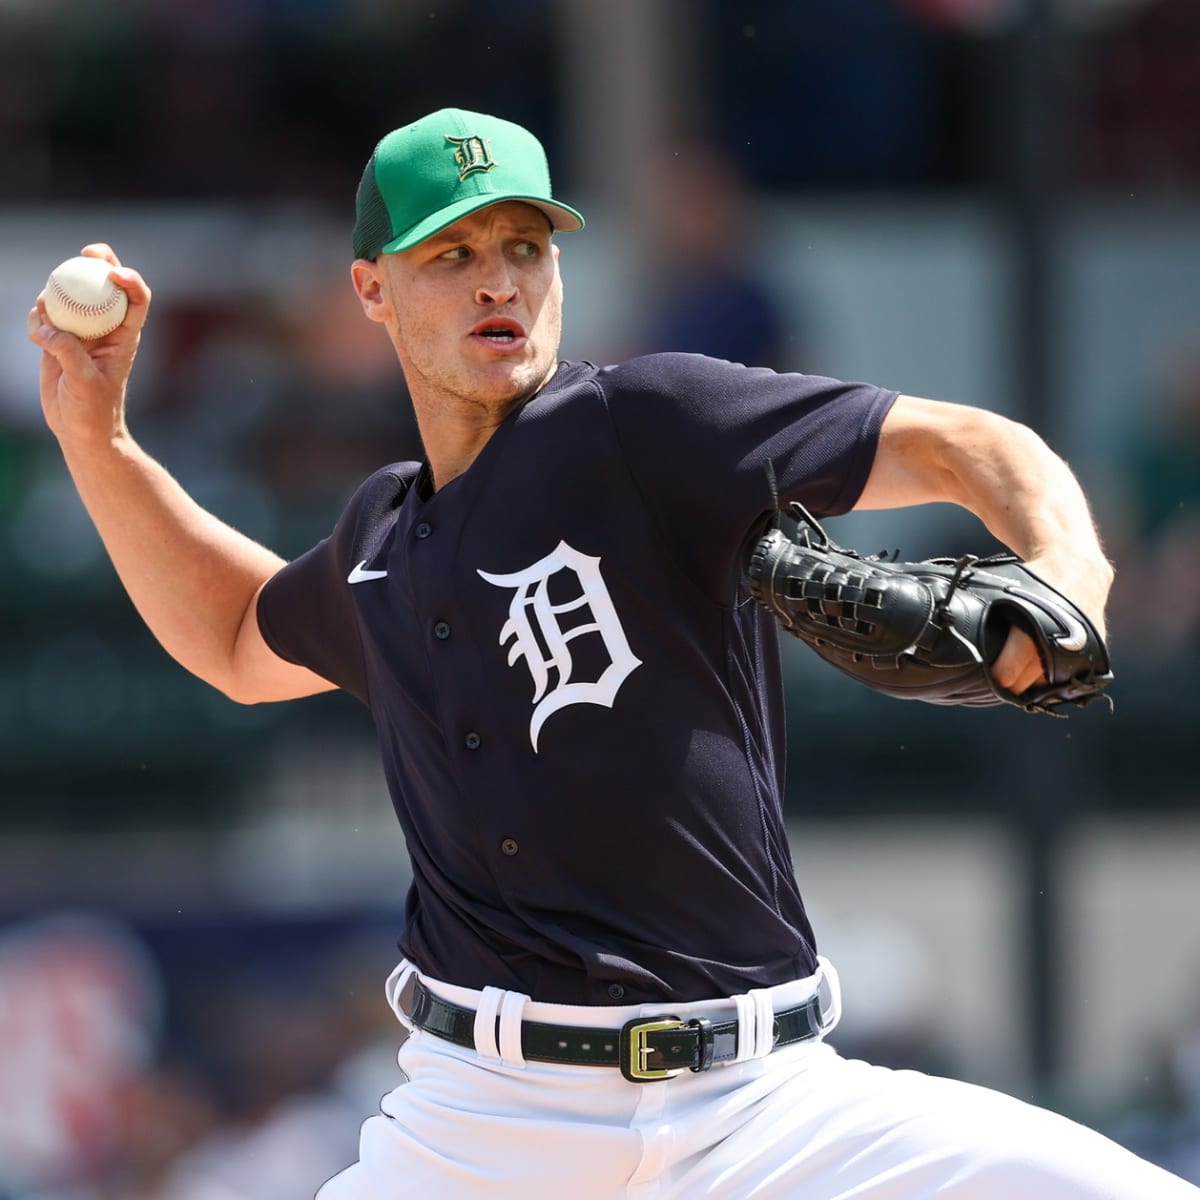 Detroit Tigers Get Welcome Injury News on Slew of Key Players - Fastball